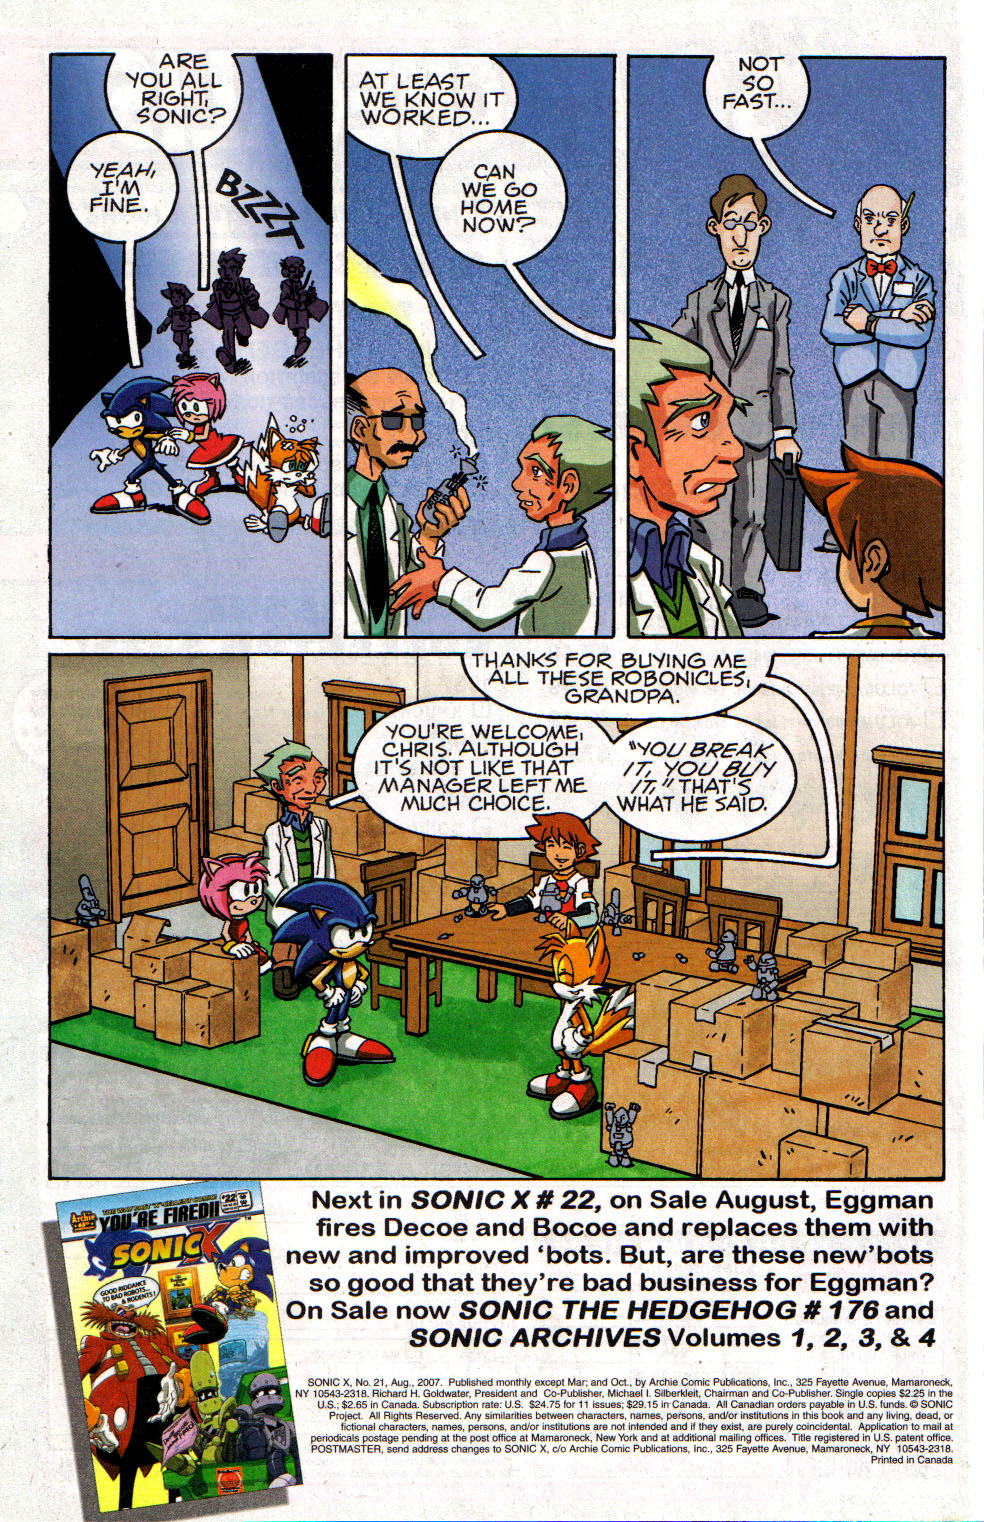 Sonic X - July 2007 Page 22